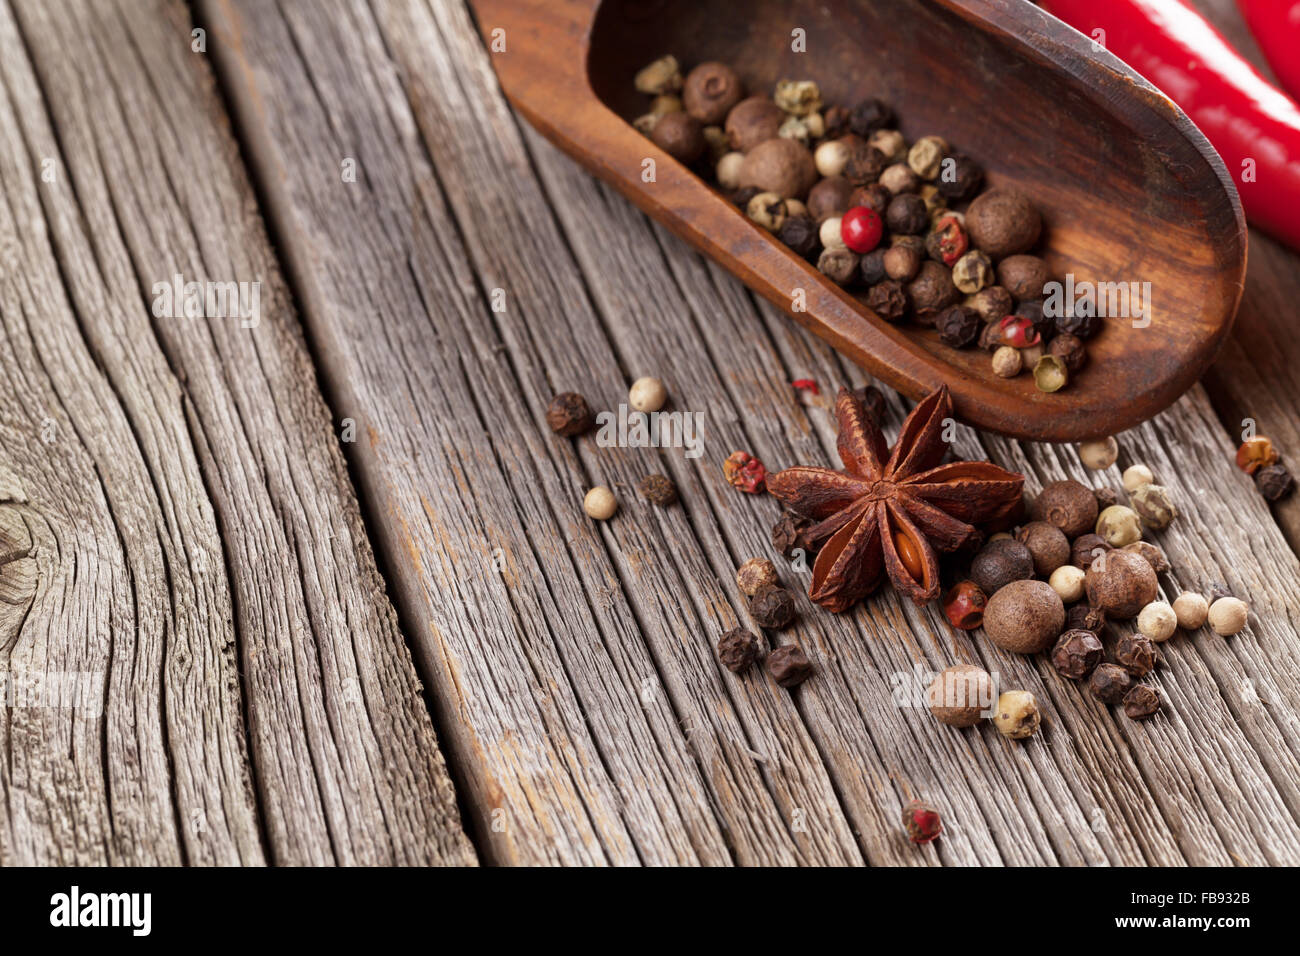 Spices on wooden table. View with copy space Stock Photo